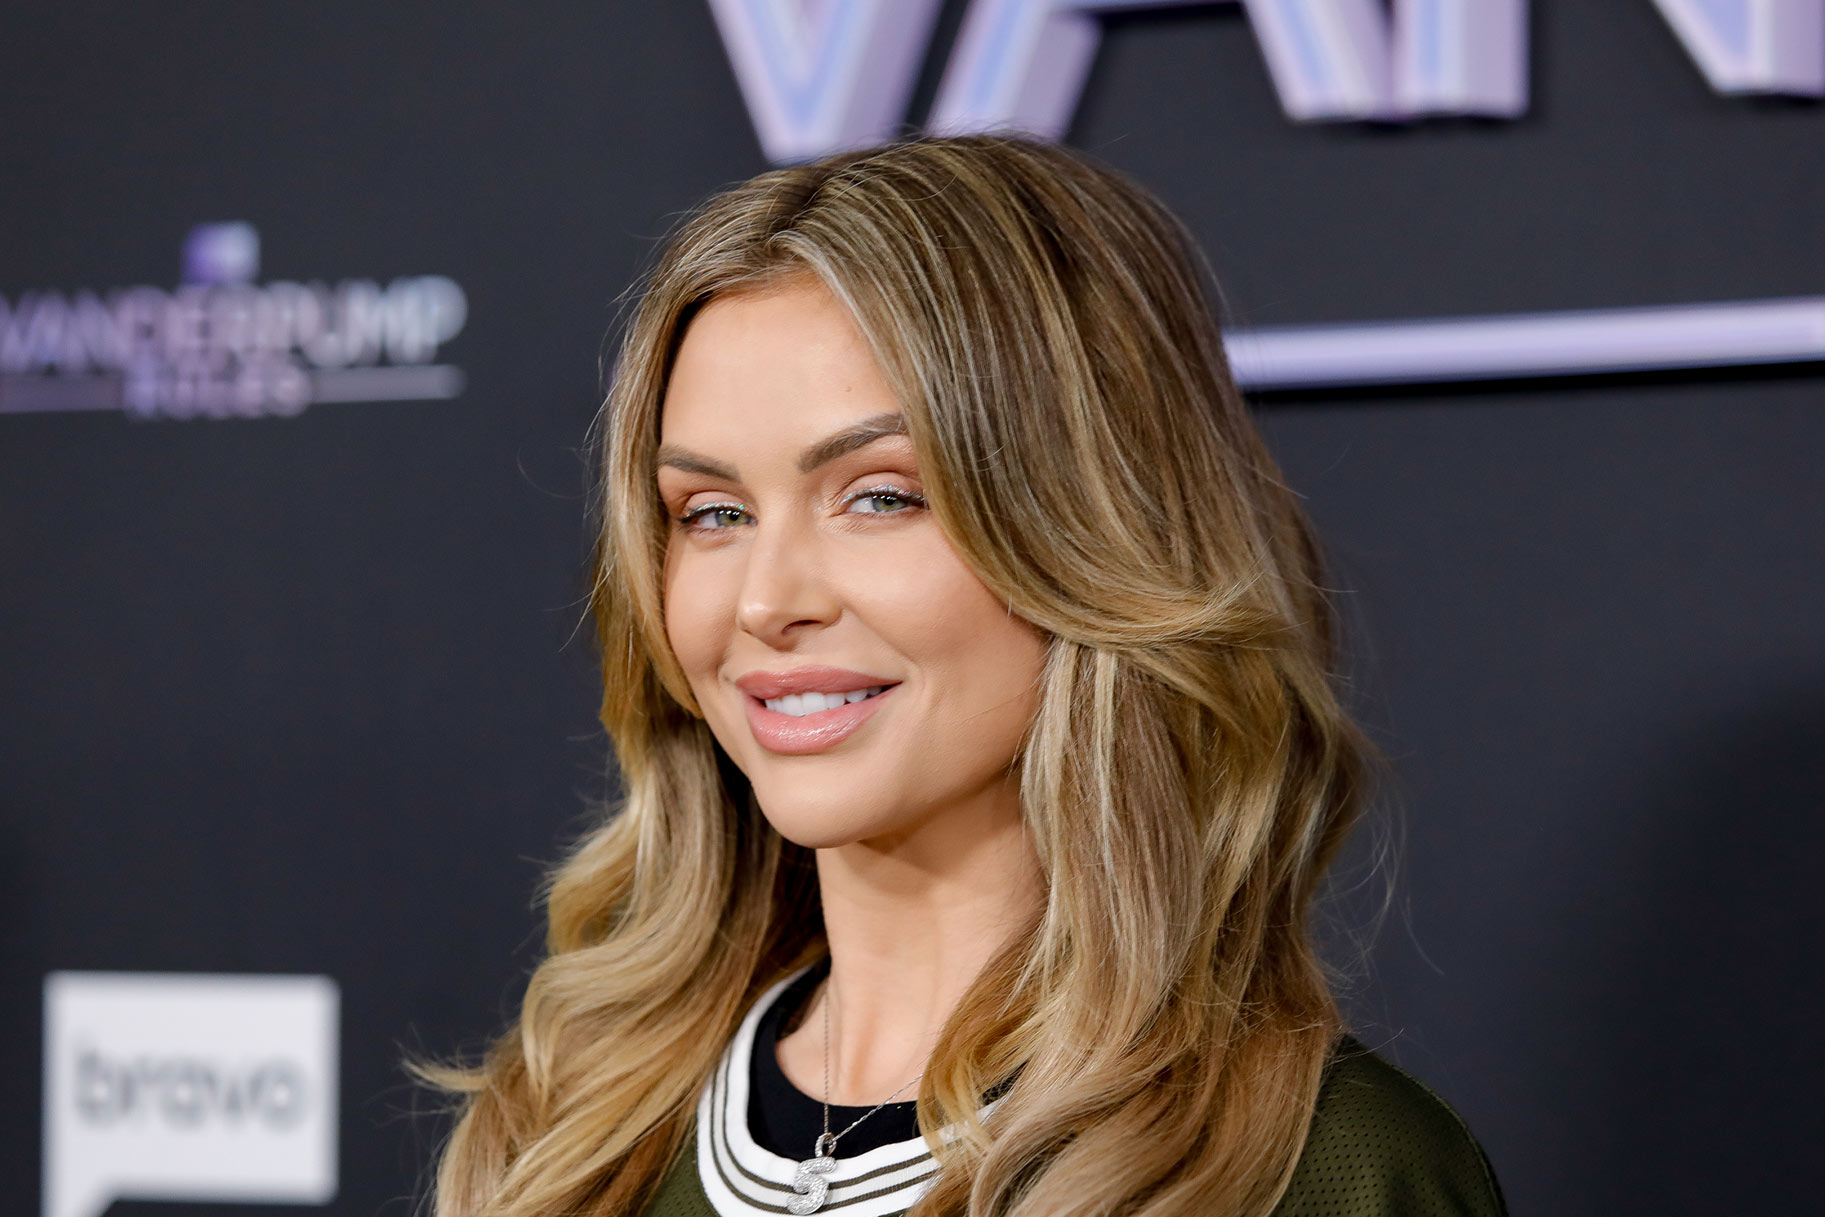 Lala Kent's Business, Give Them Lala, Is Rebranding: Details